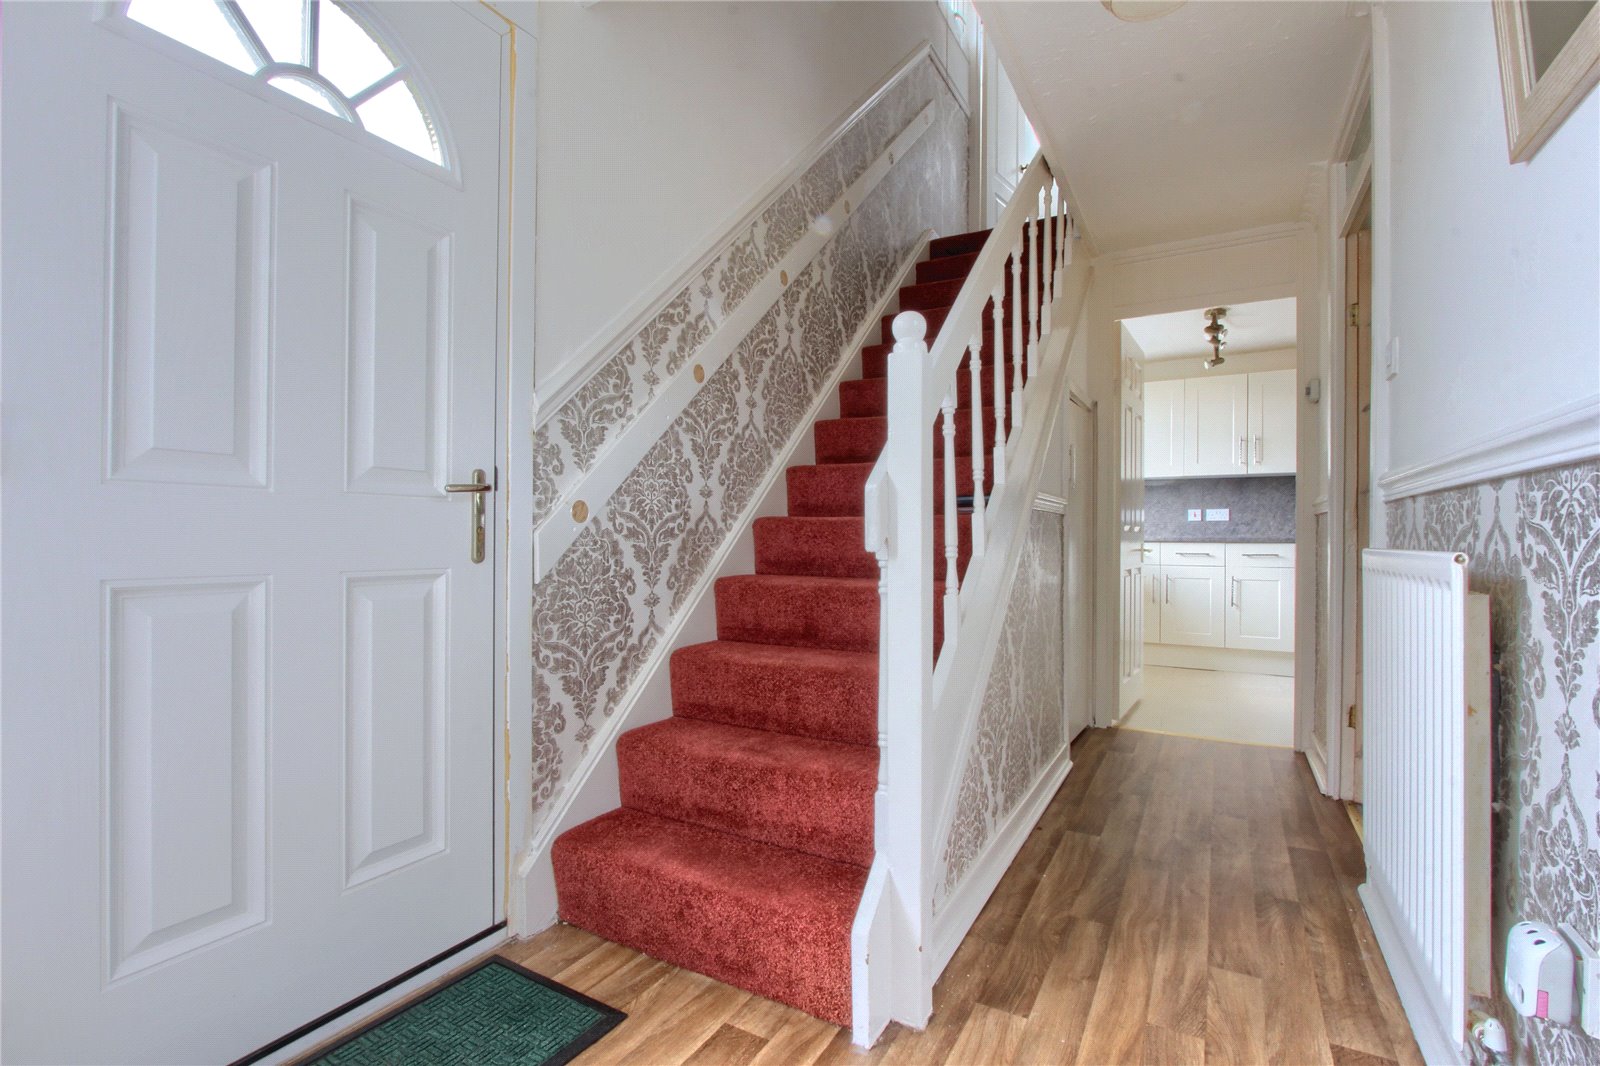 2 bed house for sale  - Property Image 6